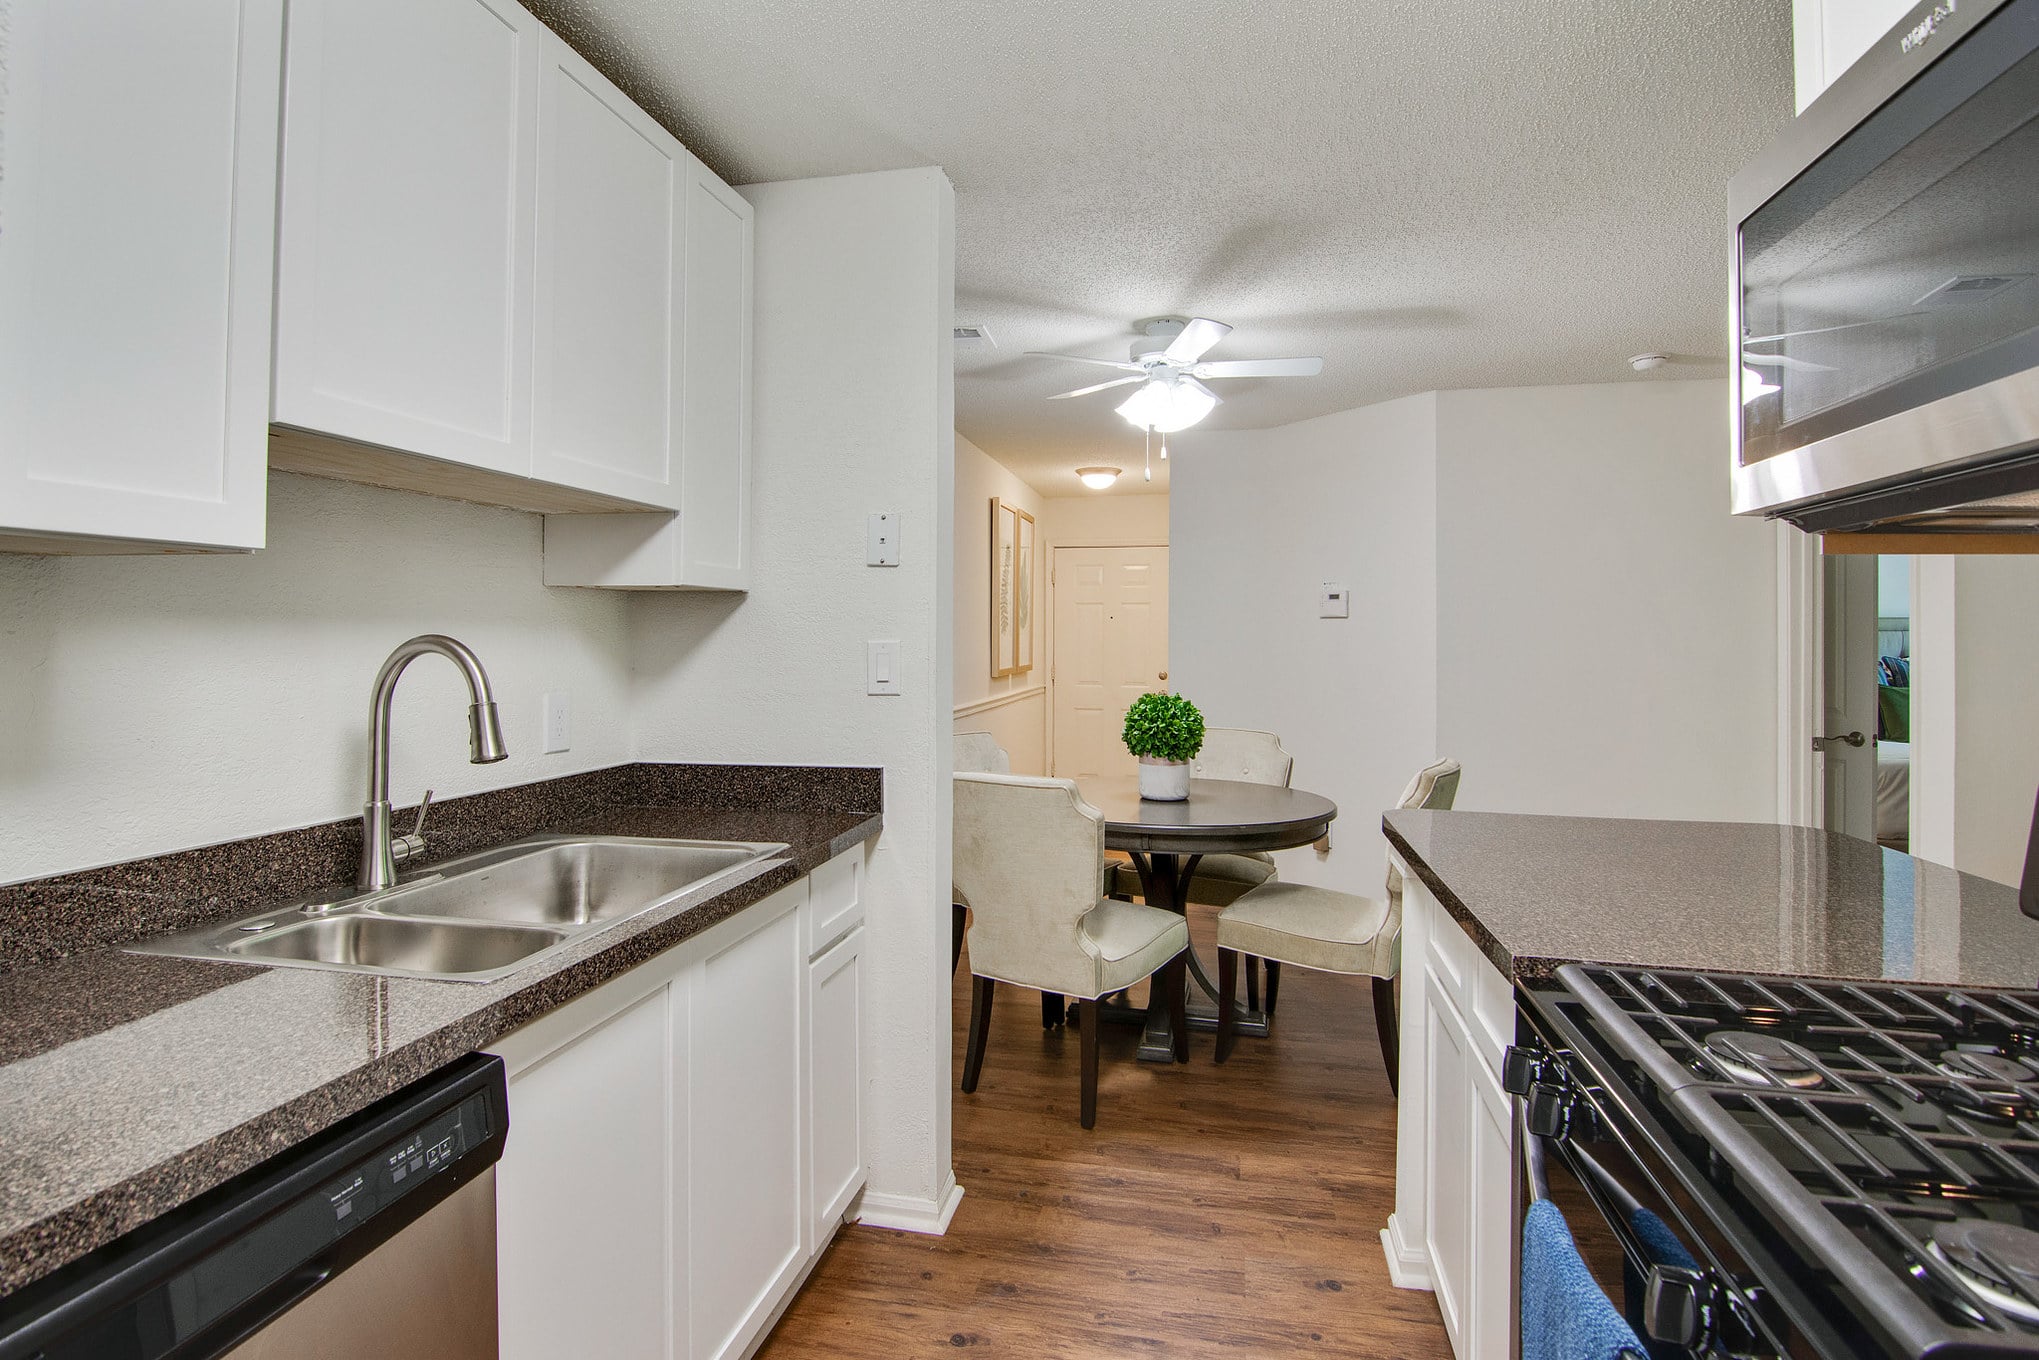 A two bedroom apartment with a kitchen featuring stainless steel appliances and white cabinets.